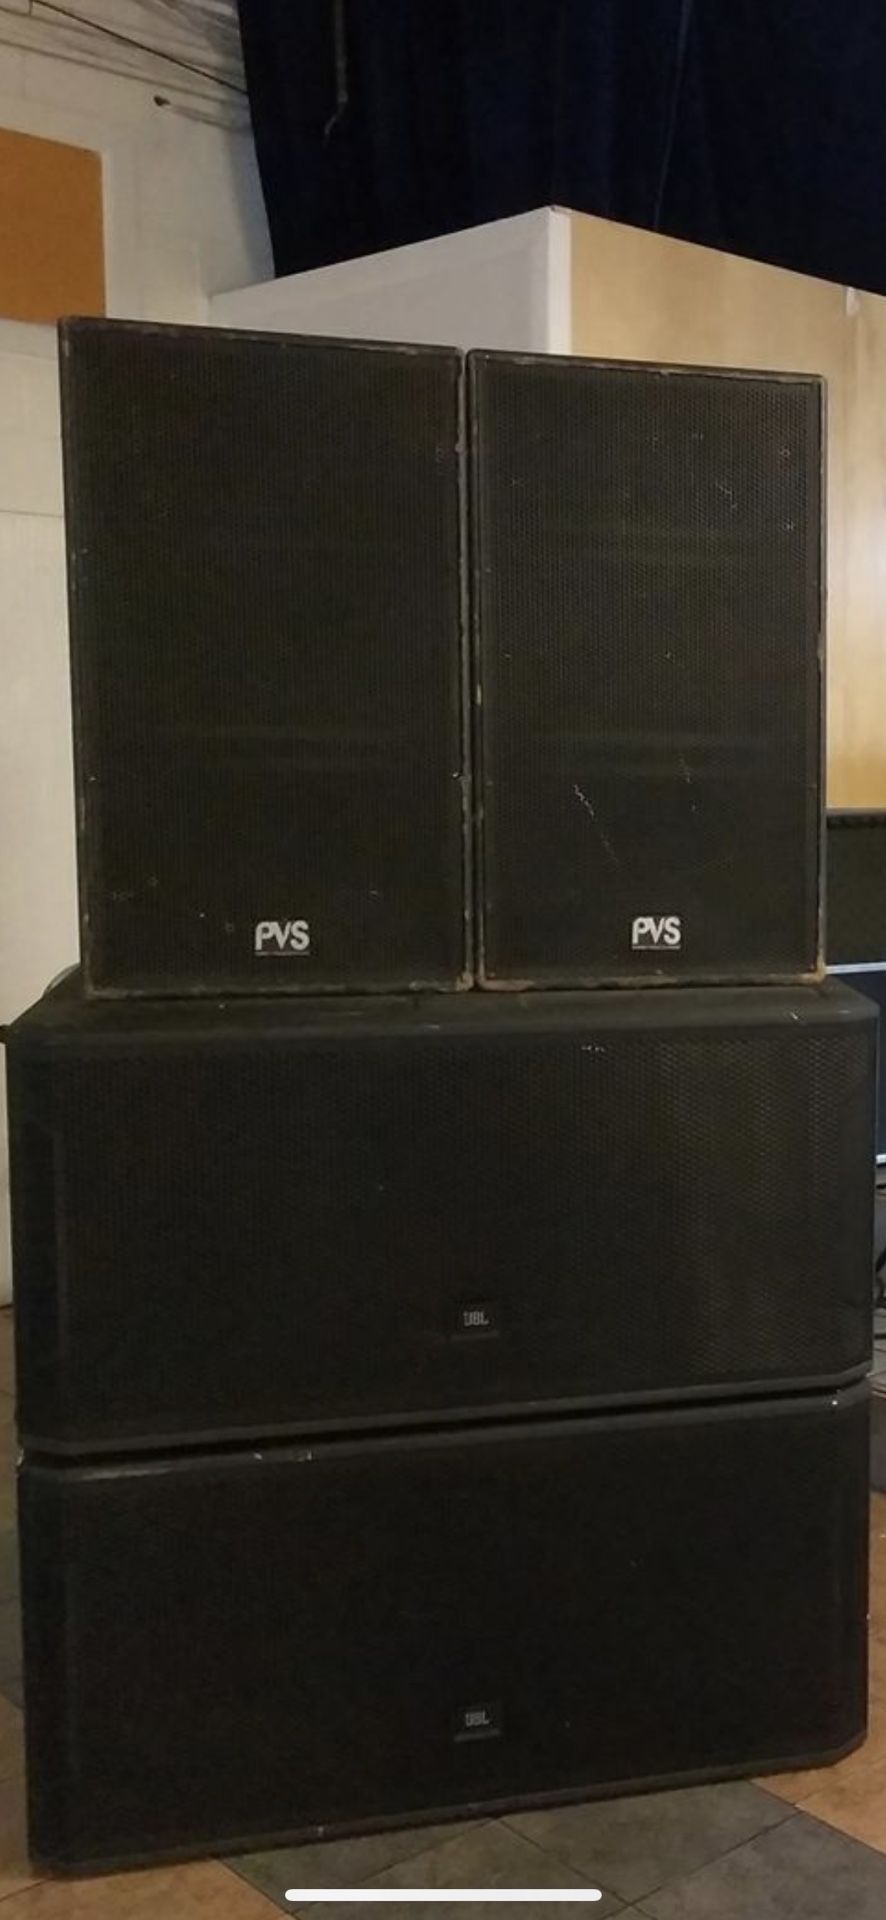 A complete sound system